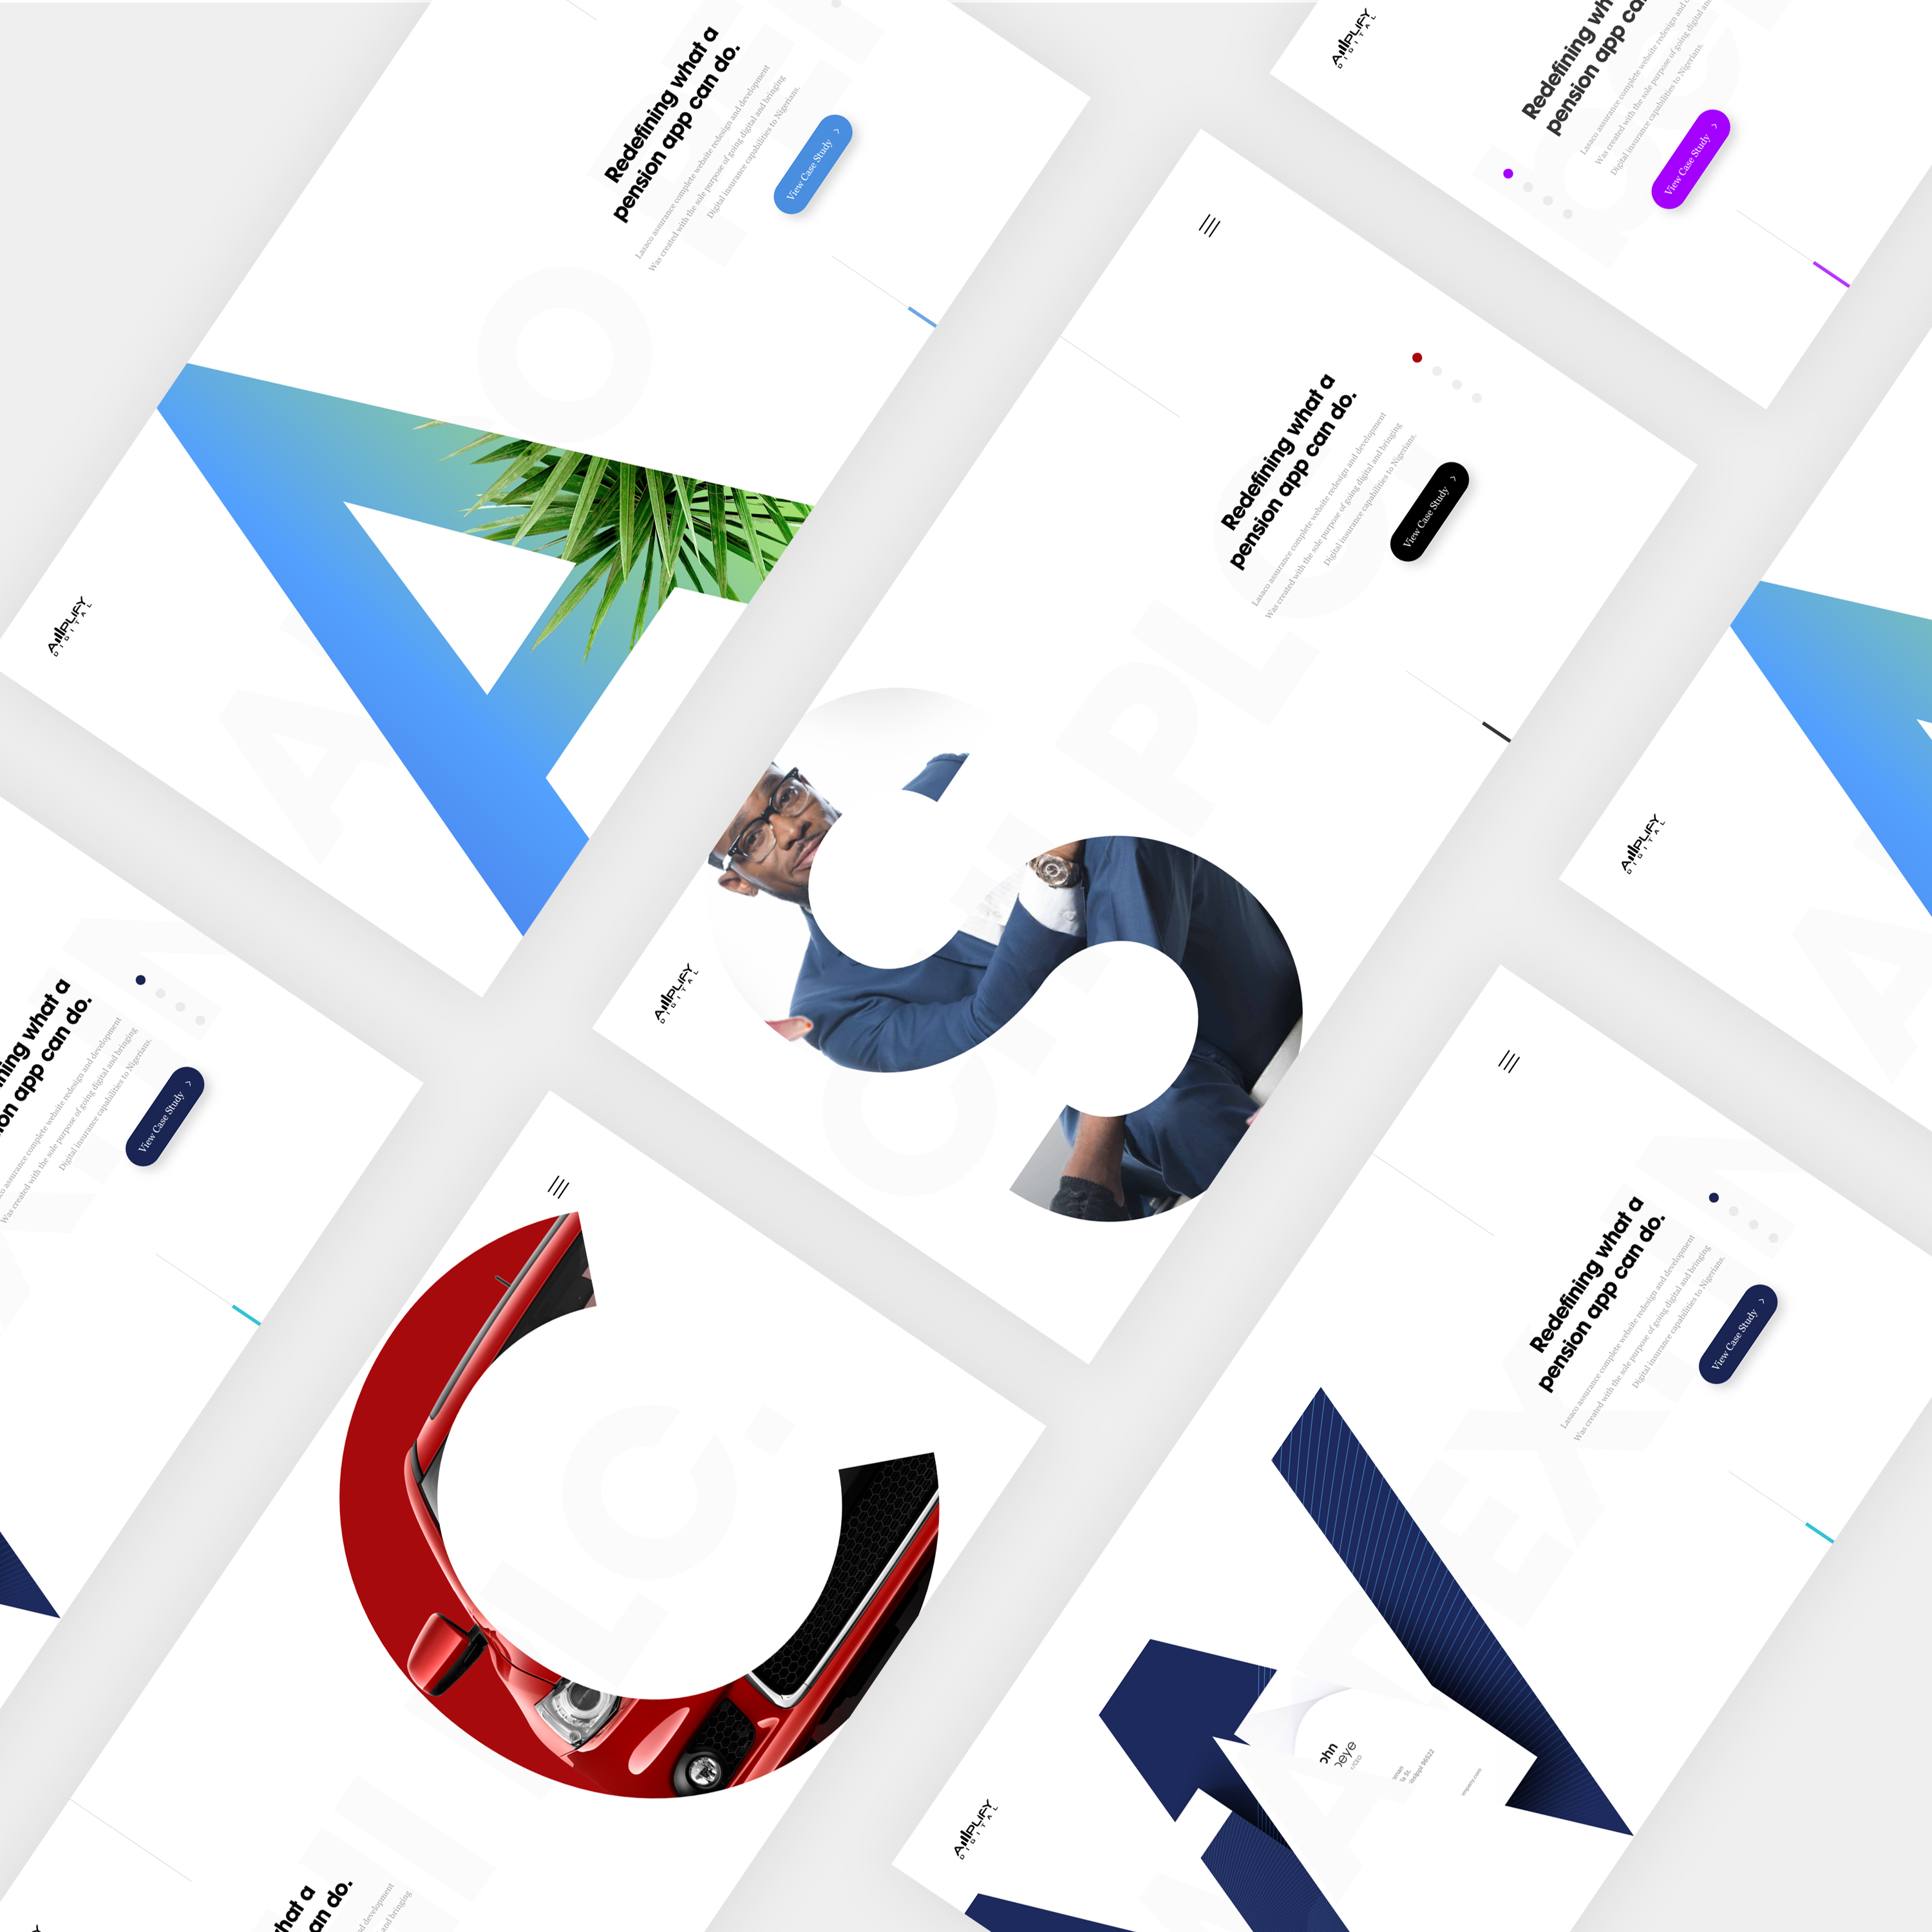 iPhone mockup #418: Case Studies Inspiration: A Roundup by aida pacheva, Henry Kunjumon and more